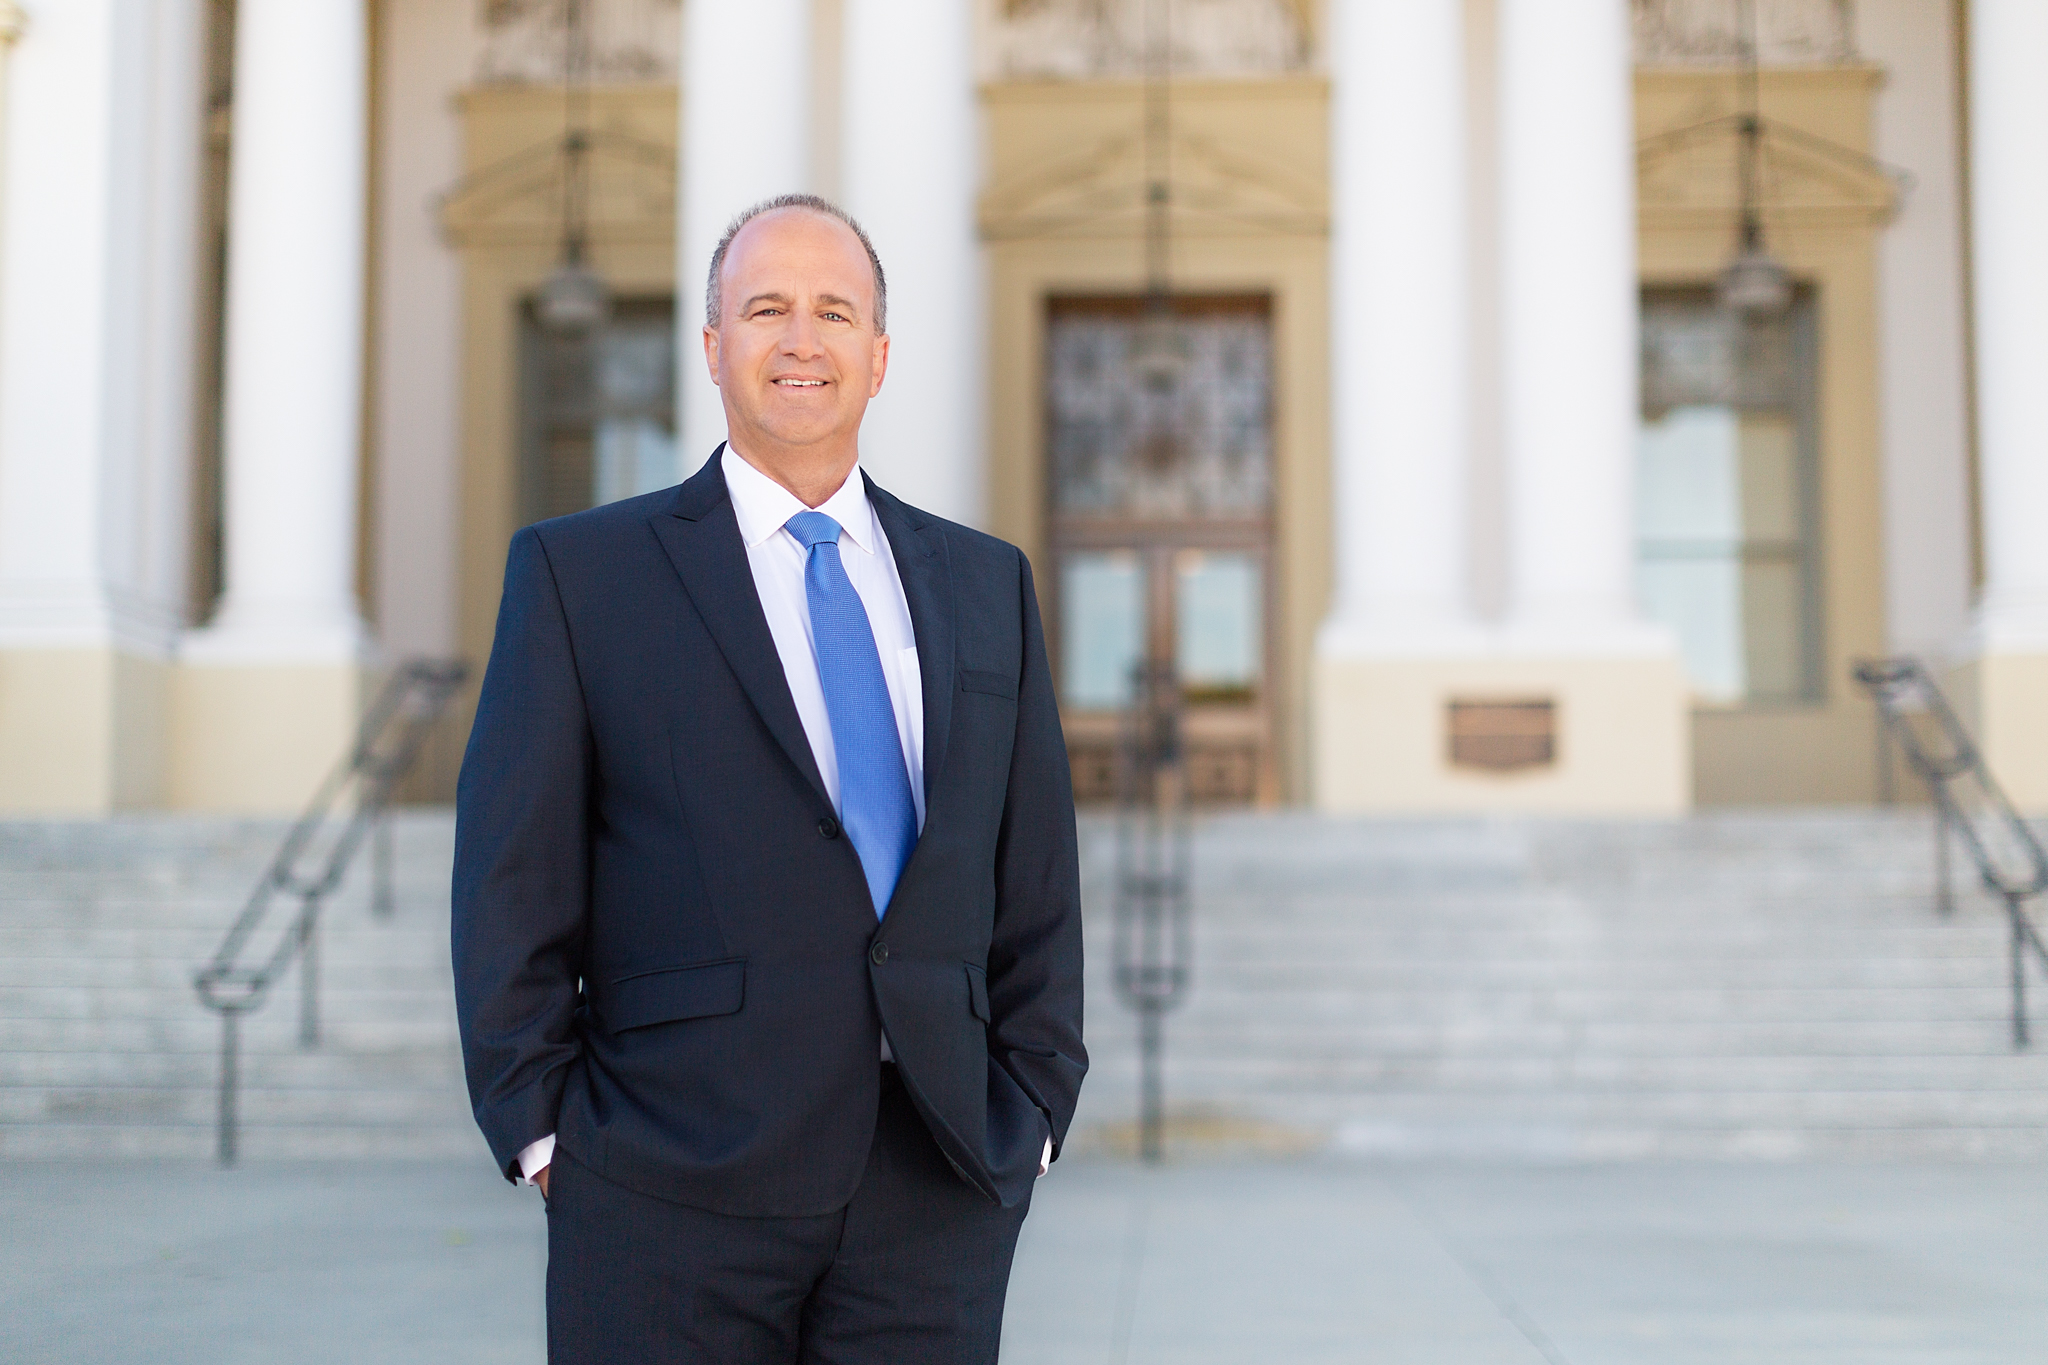 Riverside County Injured Workers Gain Powerful Advocate in Attorney Kevin Cortright